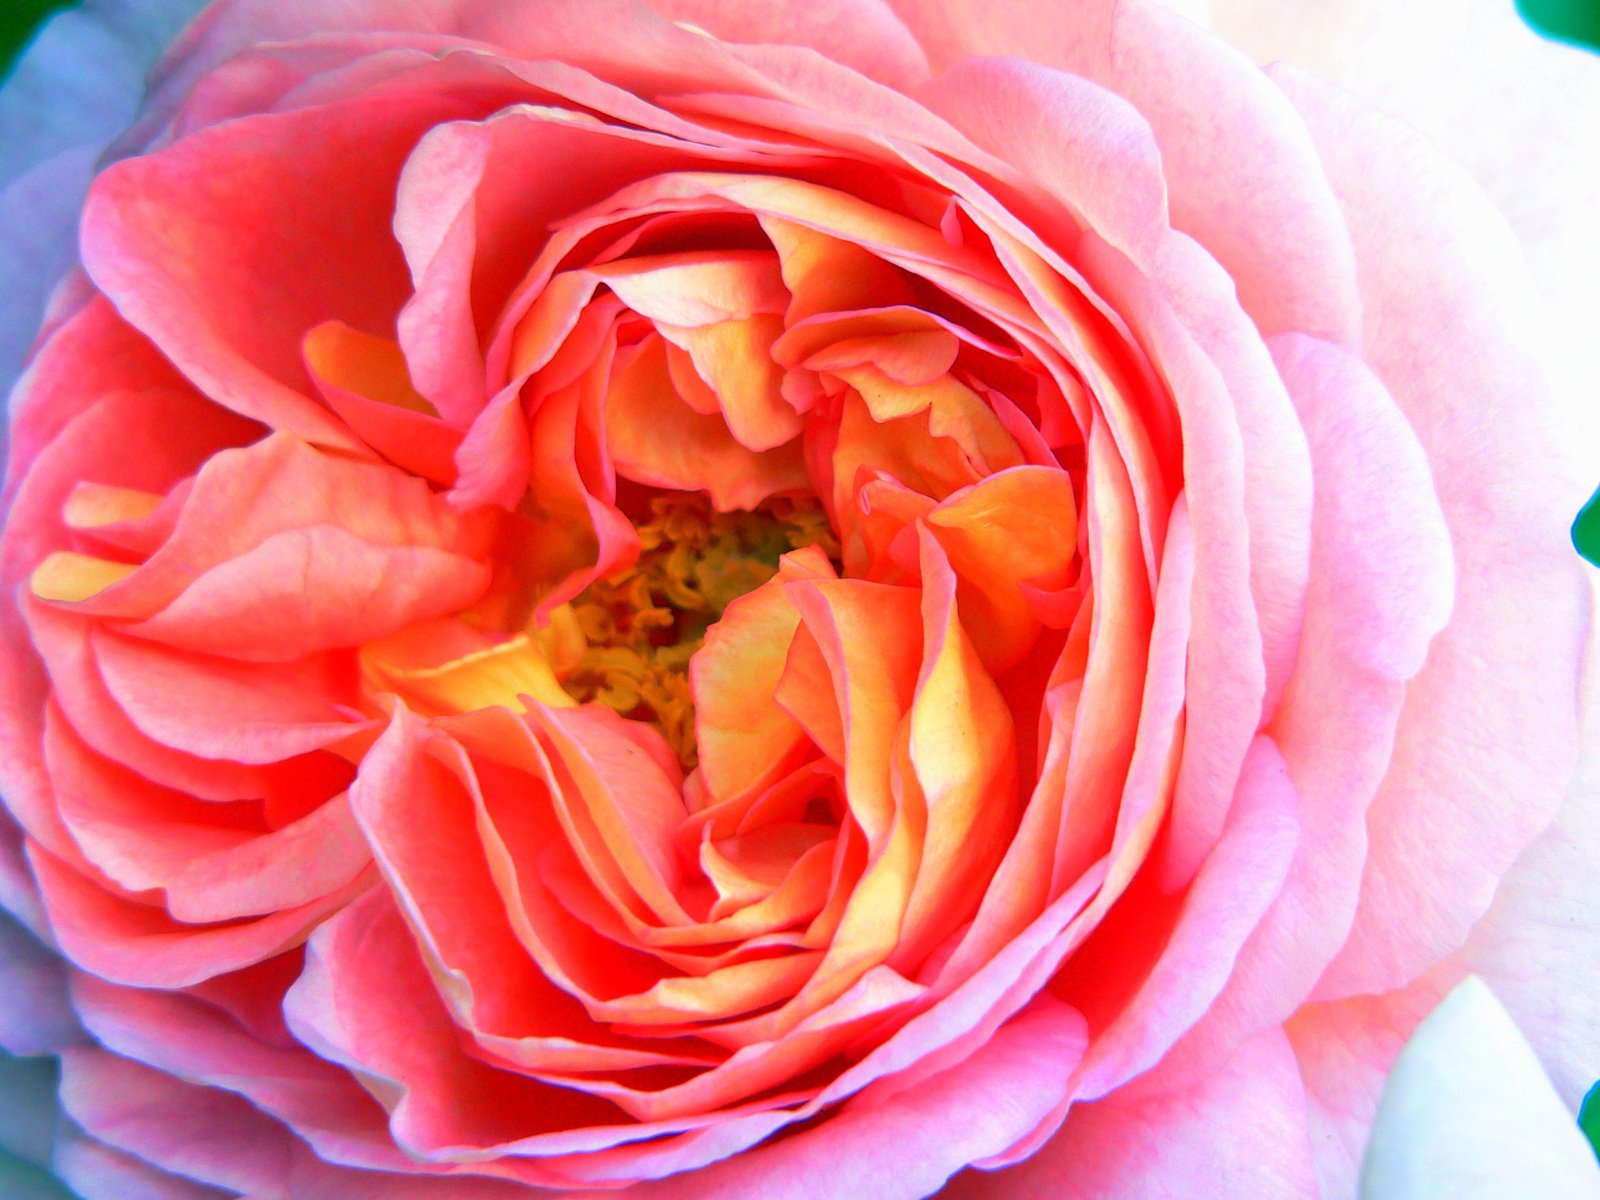 the center of a pink rose is in full bloom